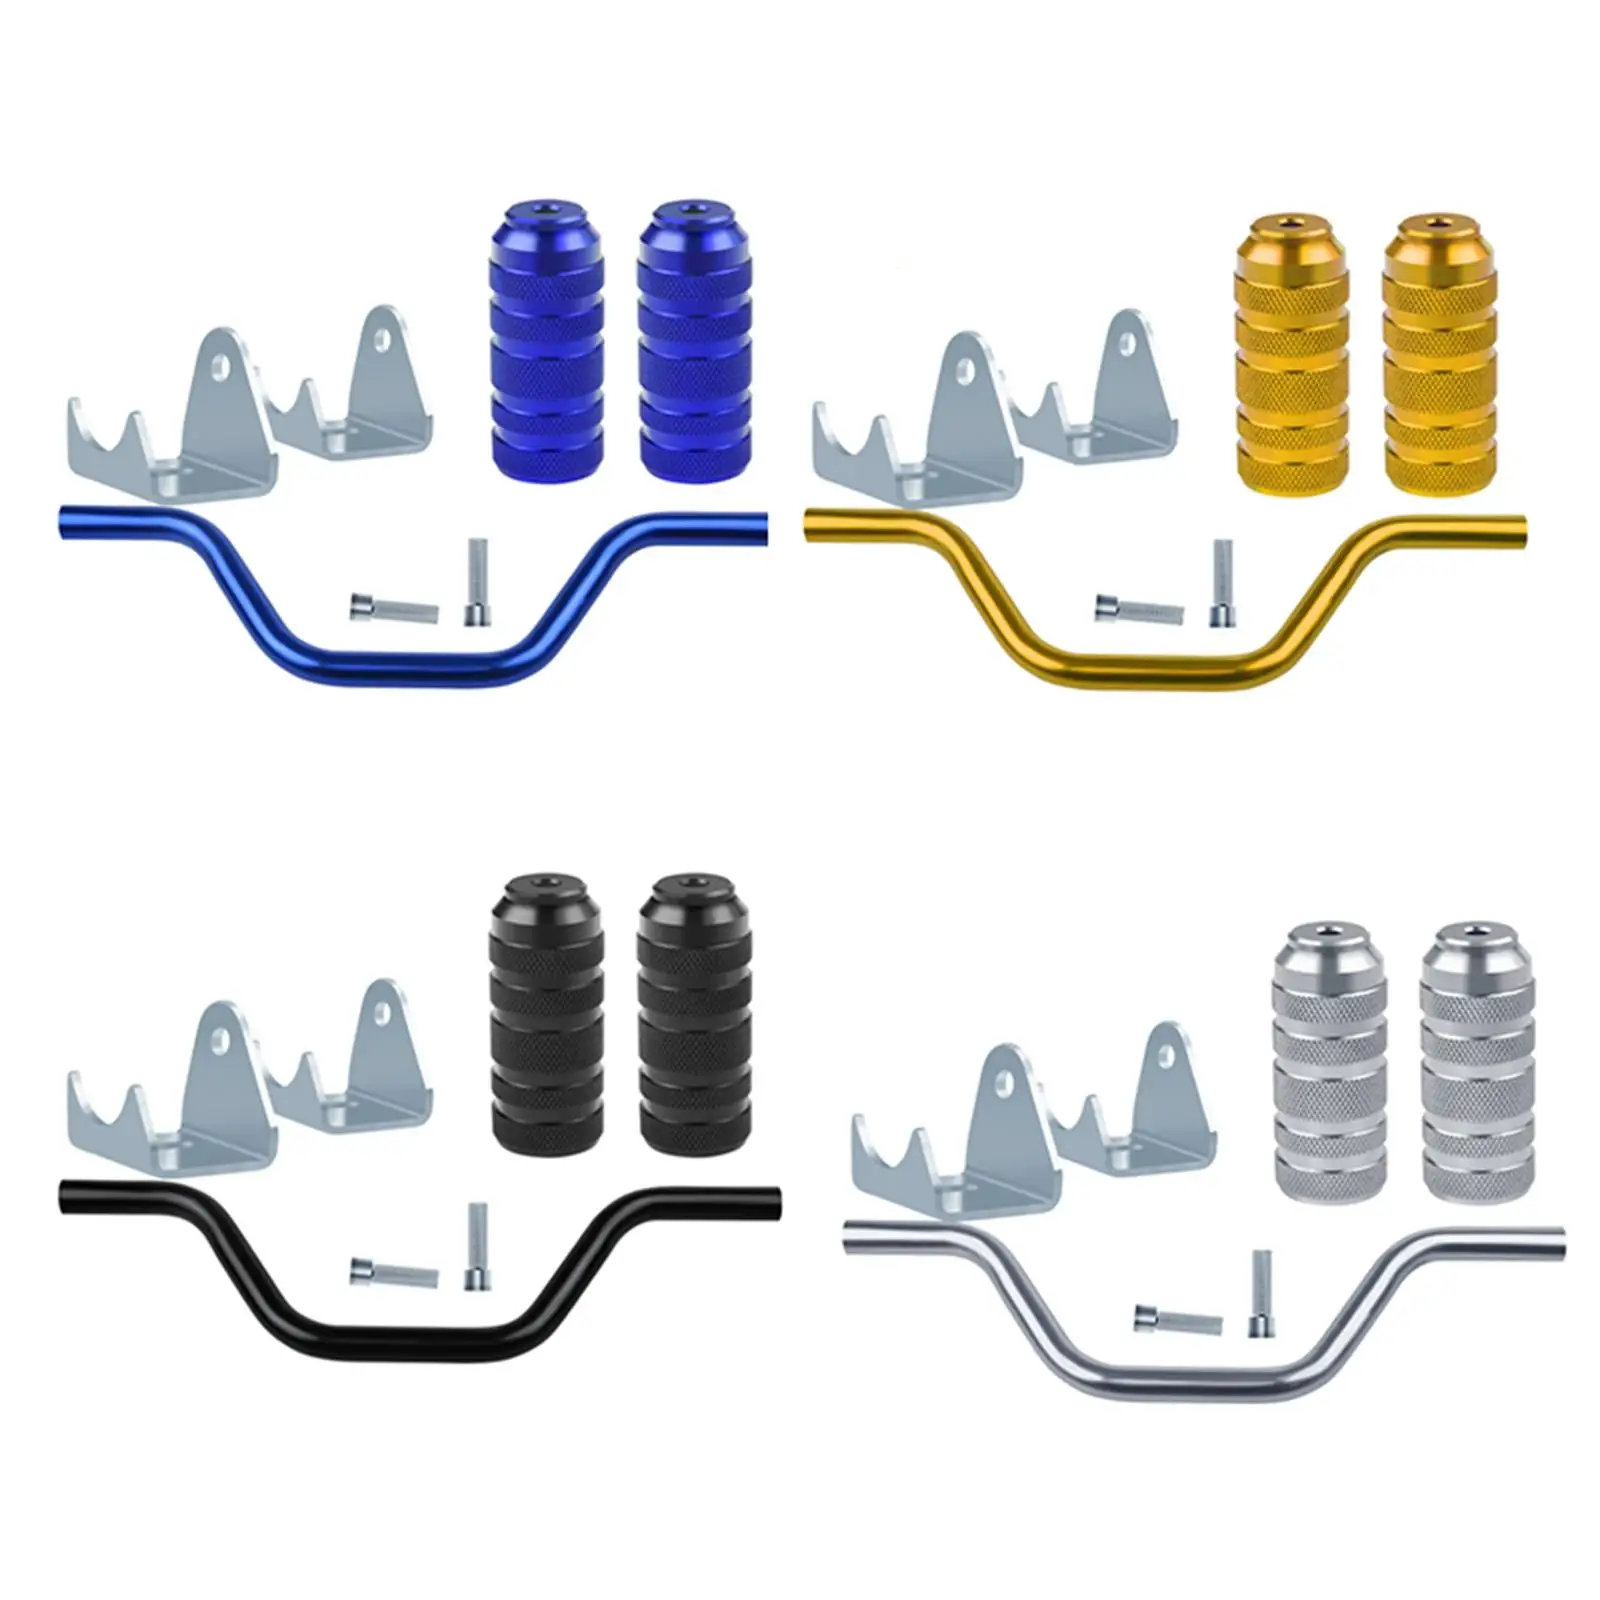 Universal Motorcycle Foot Pegs Pedals Parts CNC Foot Rests Fit for ATV Dirt Bike UTV